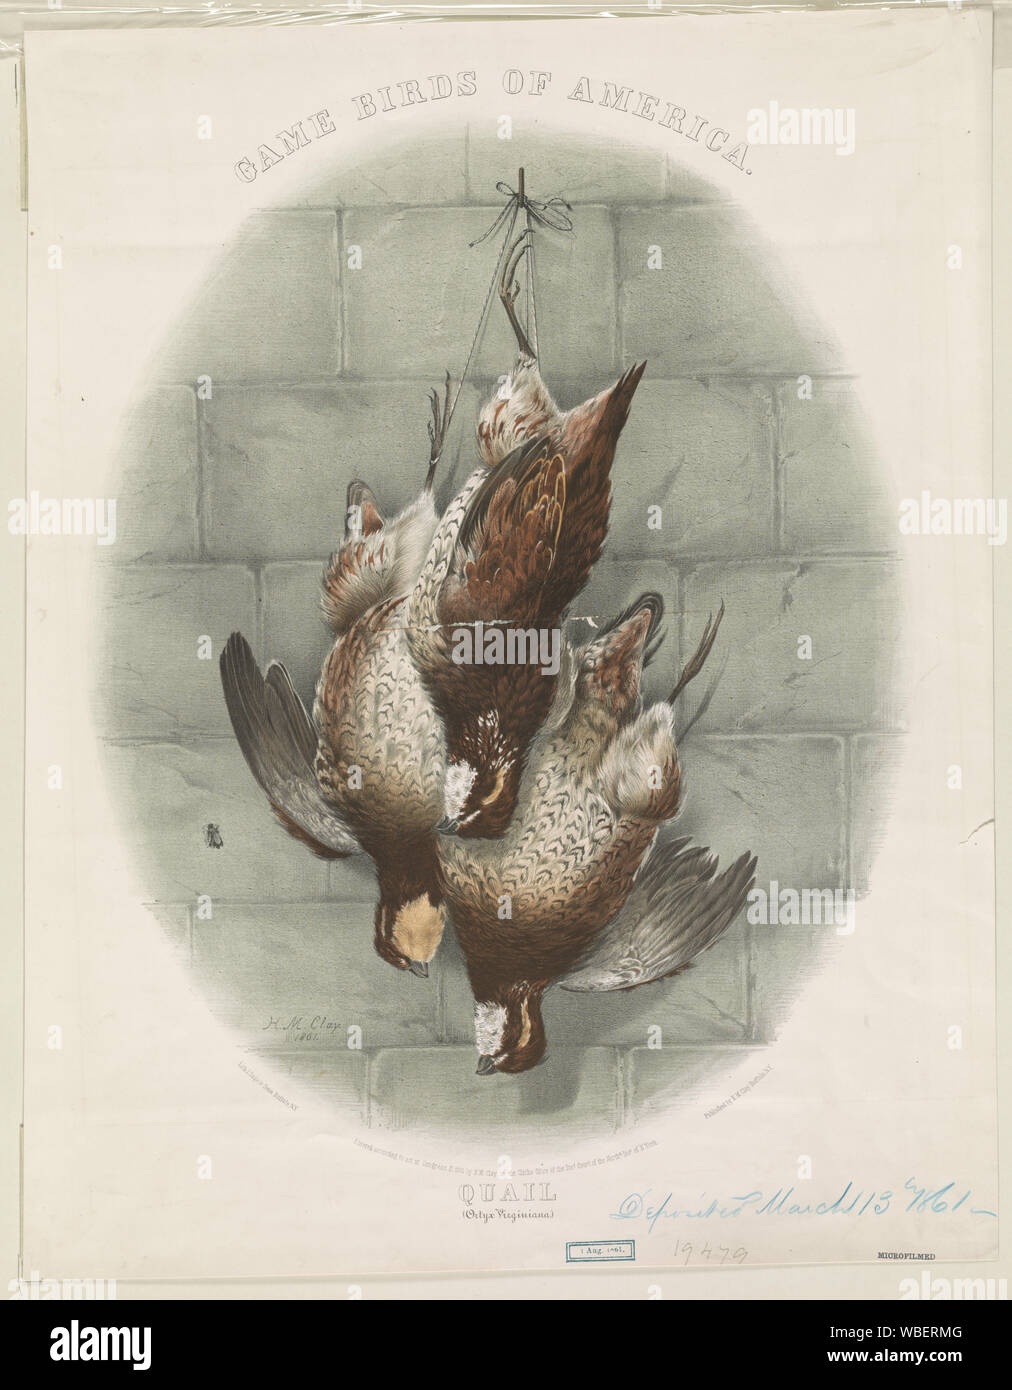 Game birds of America. Quail (Ortyx Virginiana) / H.M. Clay 1861. Abstract/medium: 1 print : lithograph, color ; 57.6 x 44.7 cm (sheet) Stock Photo